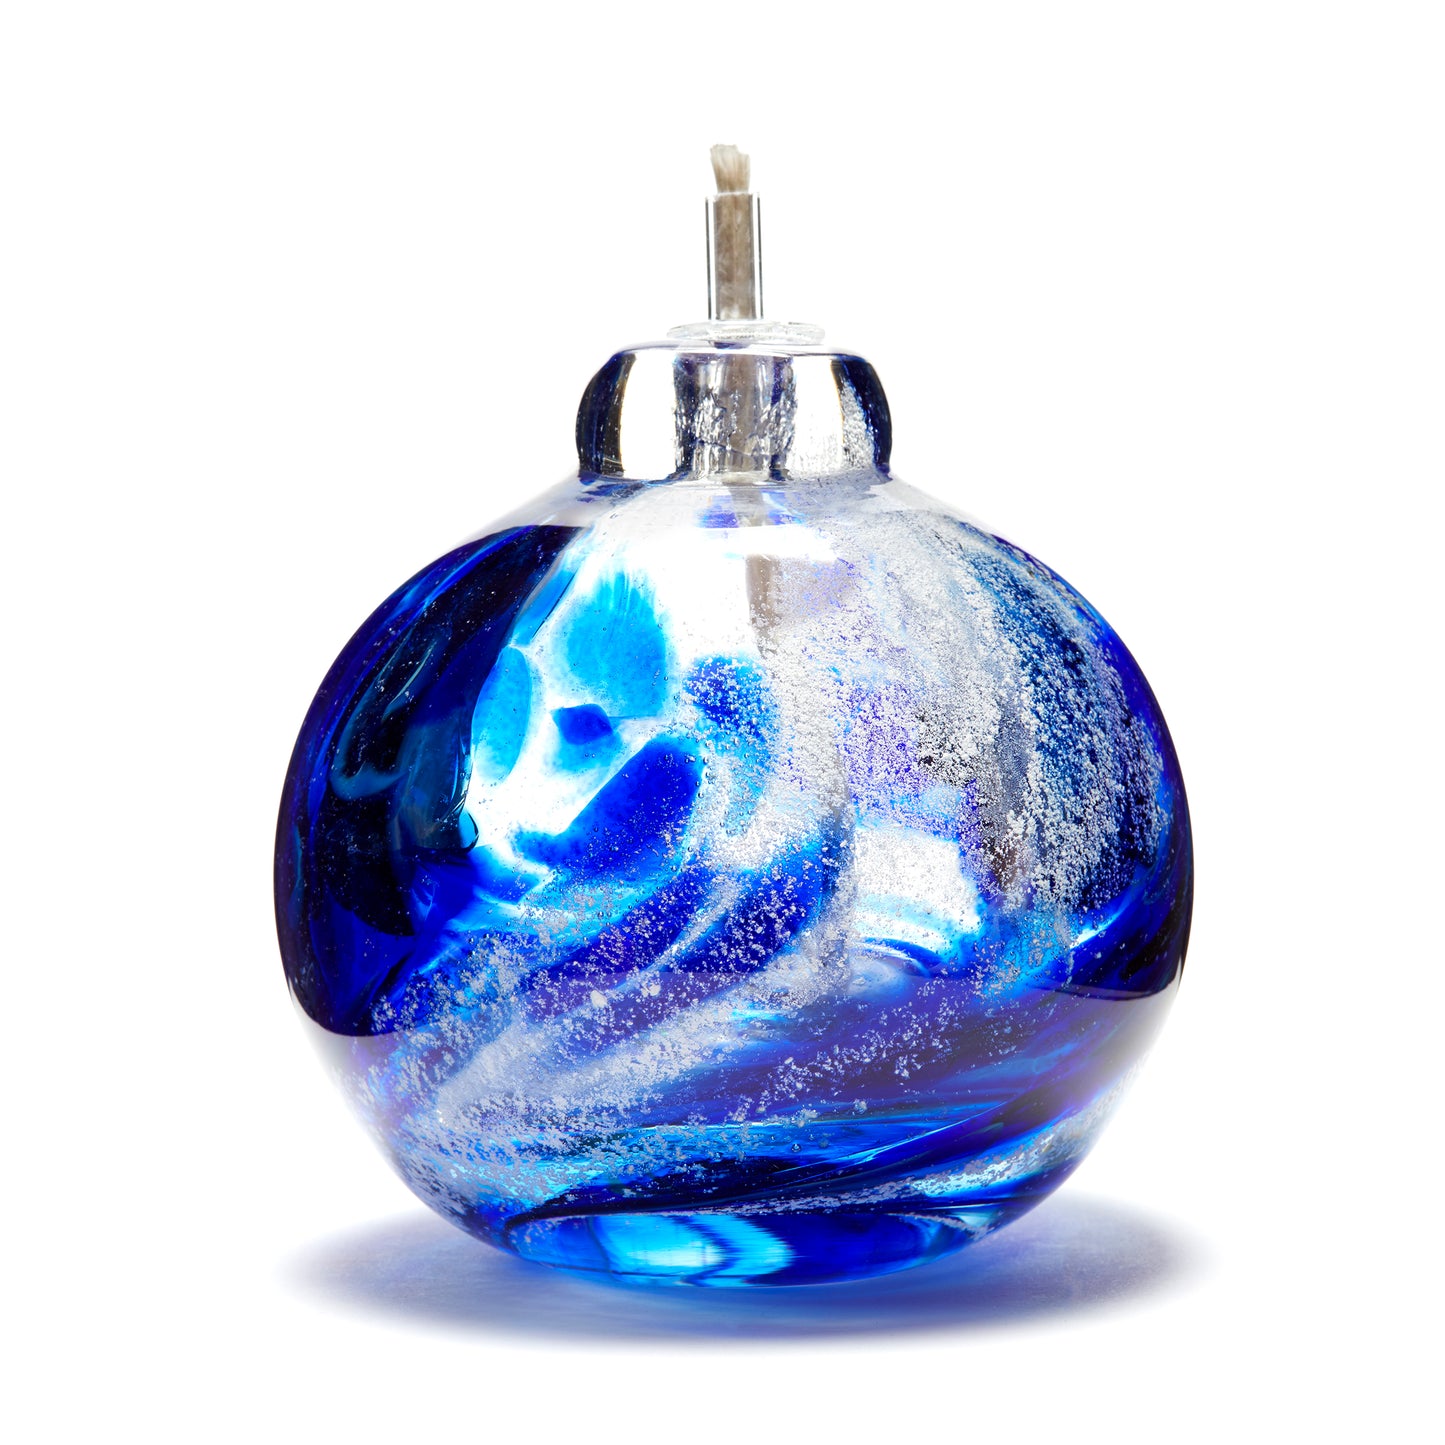 Round memorial glass art eternal flame oil lamp with cremation ash. Cobalt blue glass.